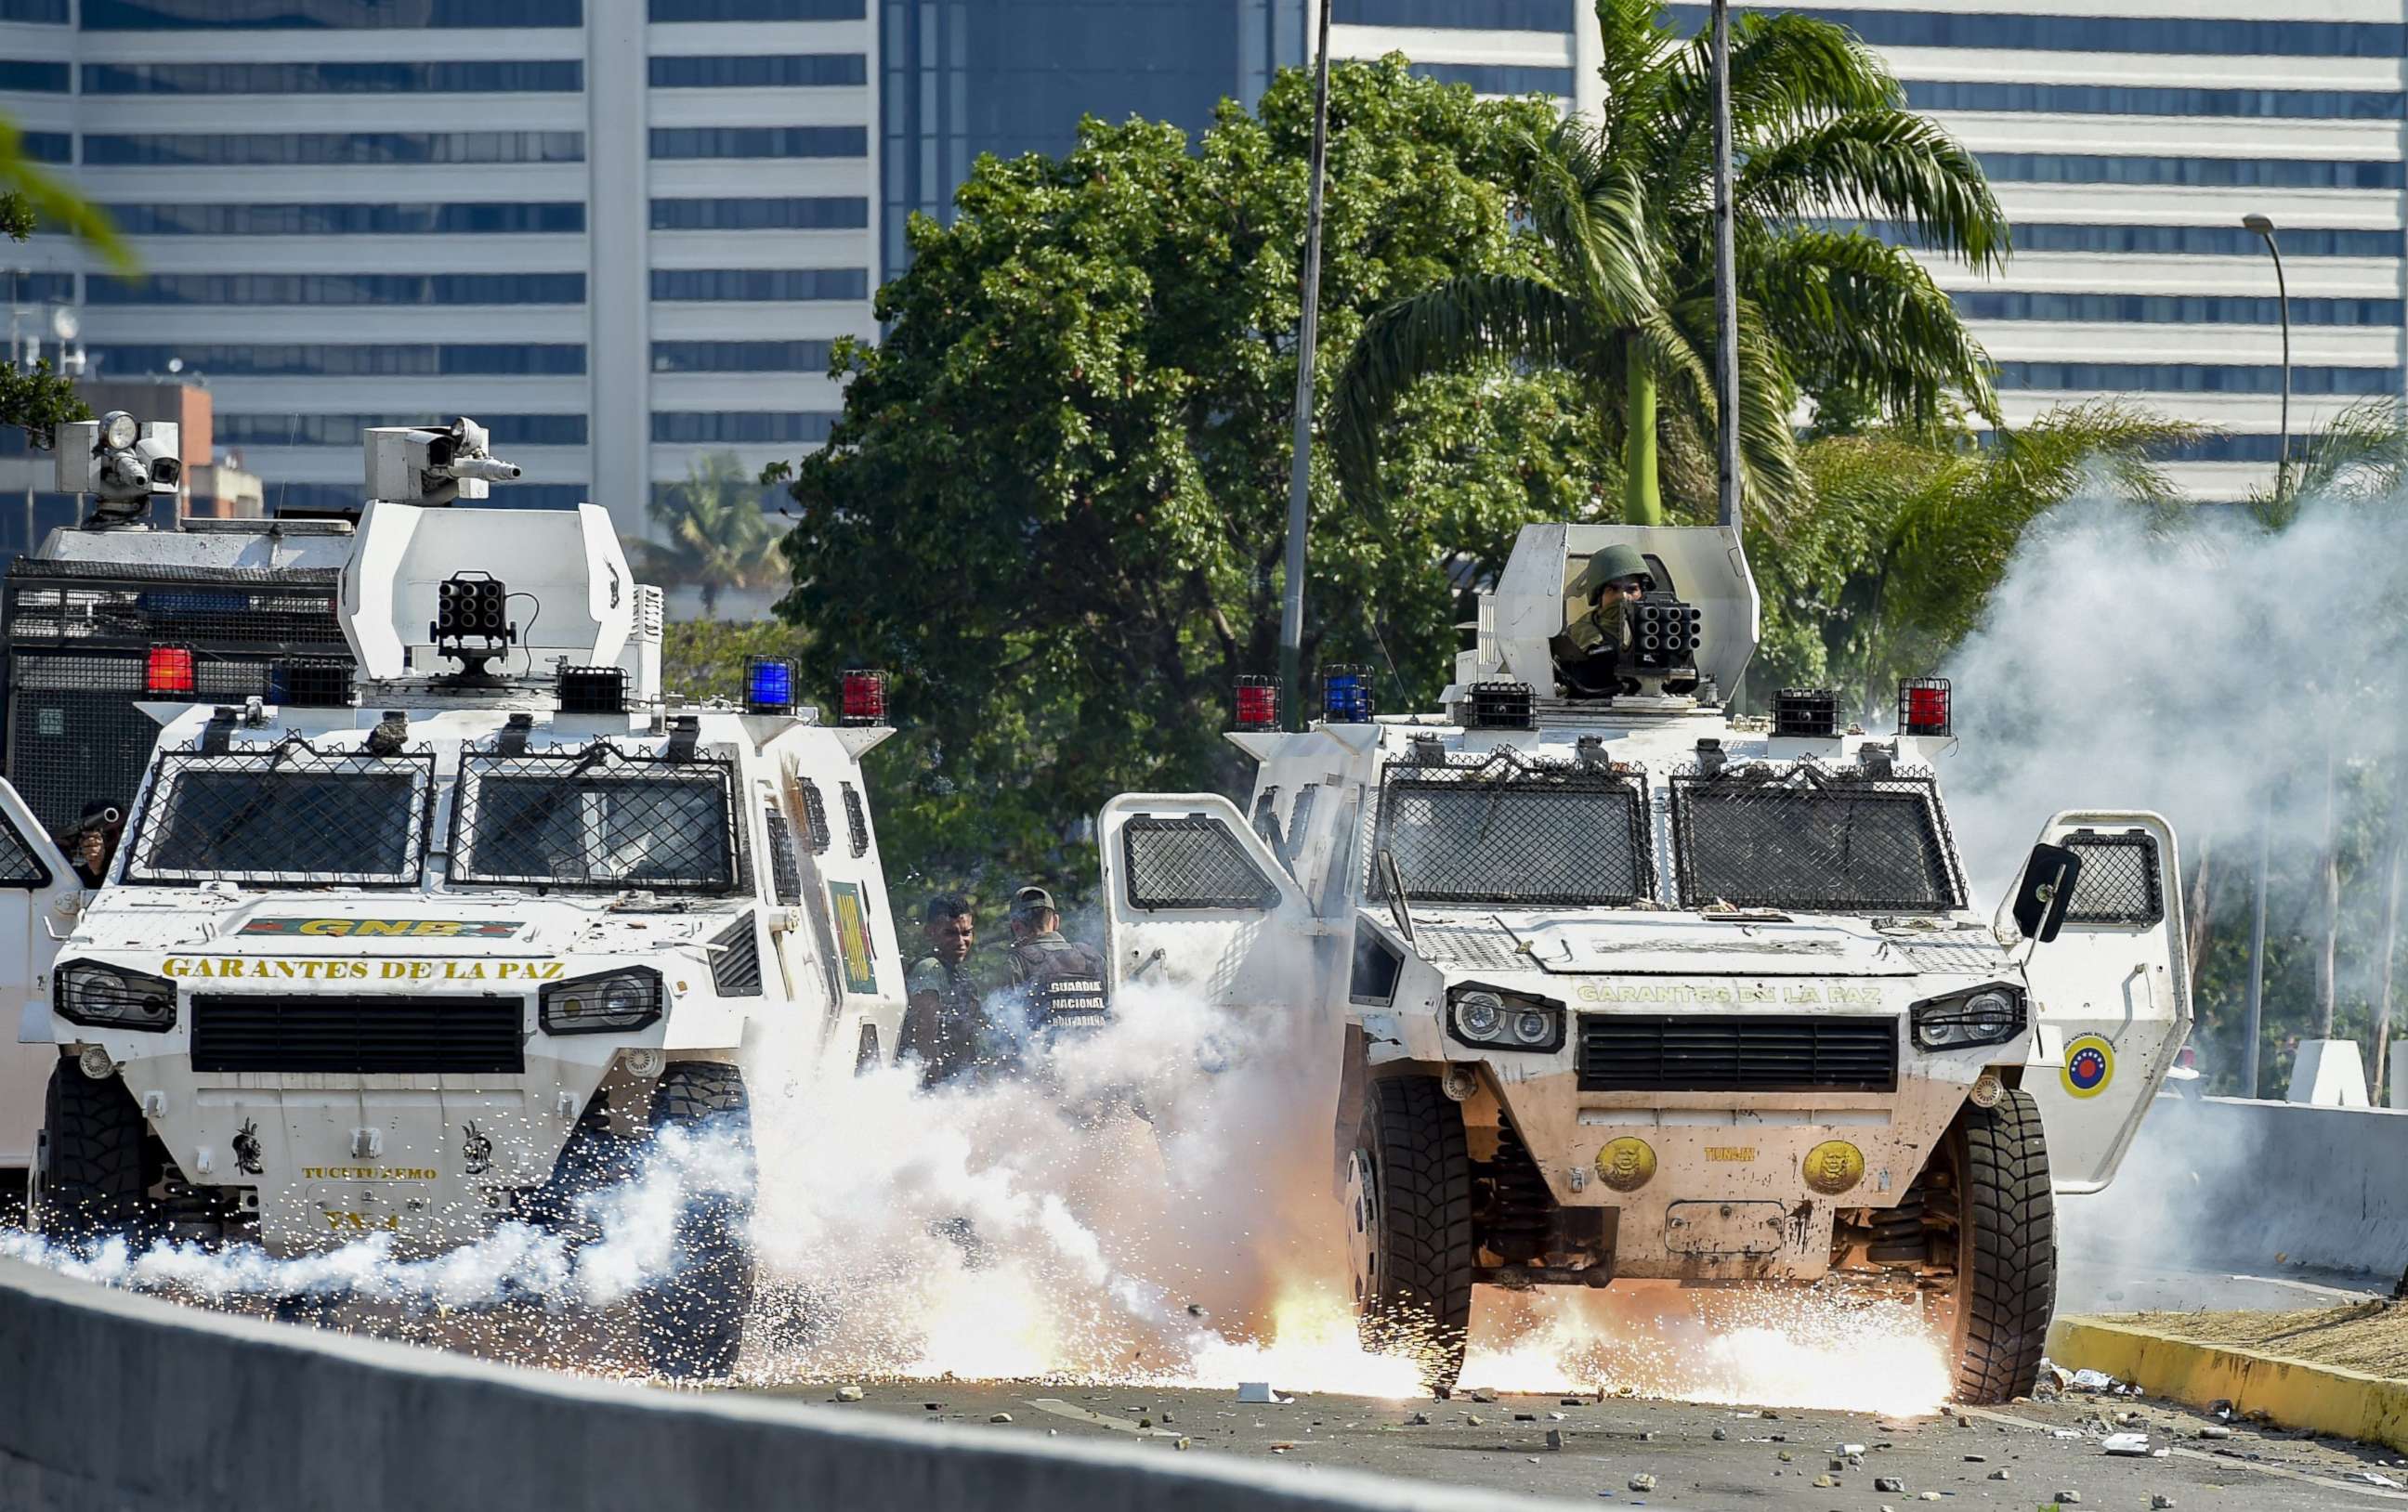 PHOTO: An explosion occurs under a military vehicle during clashes between forces loyal to Venezuelan President Nicolas Maduro and opposition demonstrators in Caracas on April 30, 2019. 